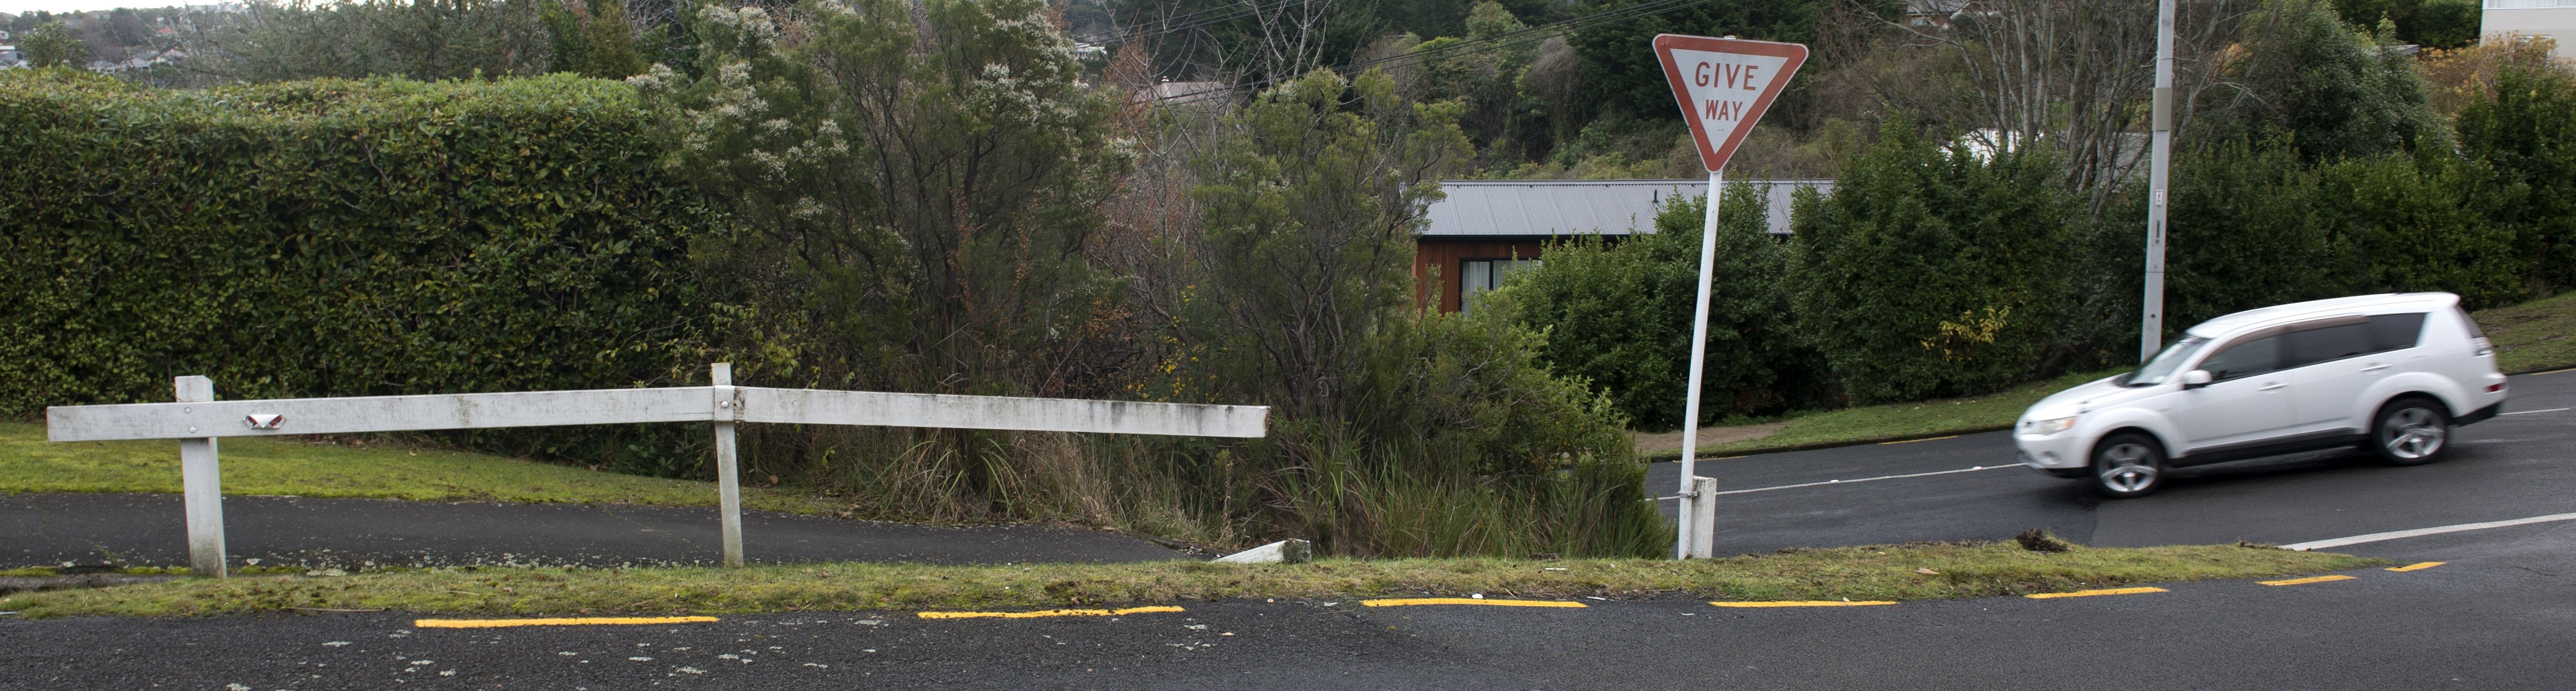 The give way sign at the intersection of Fea and Orbell Sts has been re-erected but the barrier...